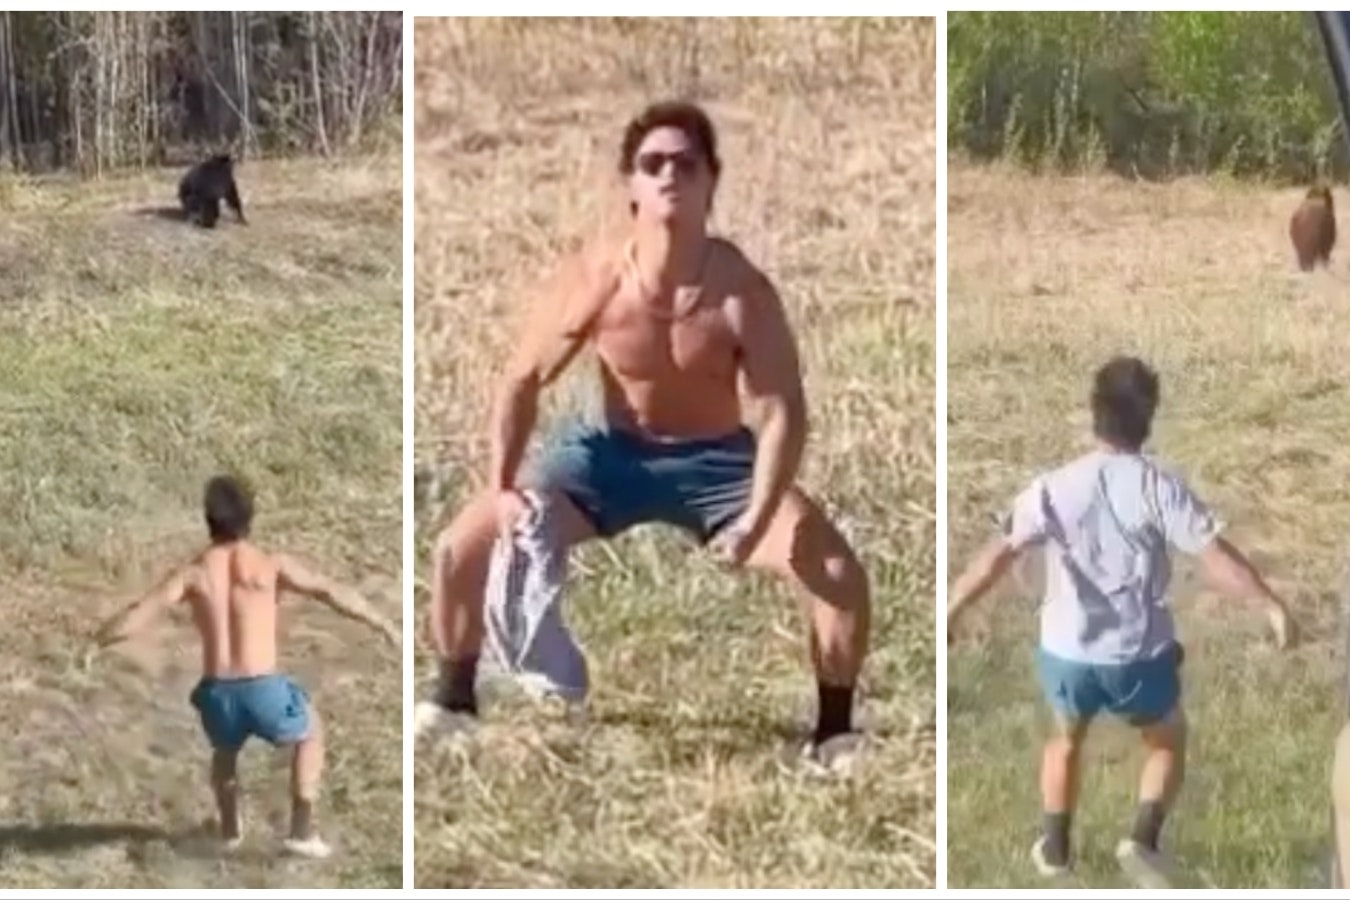 These images for a video show a man charging at a bear in Yellowstone, then flexing after the bear ambles off.